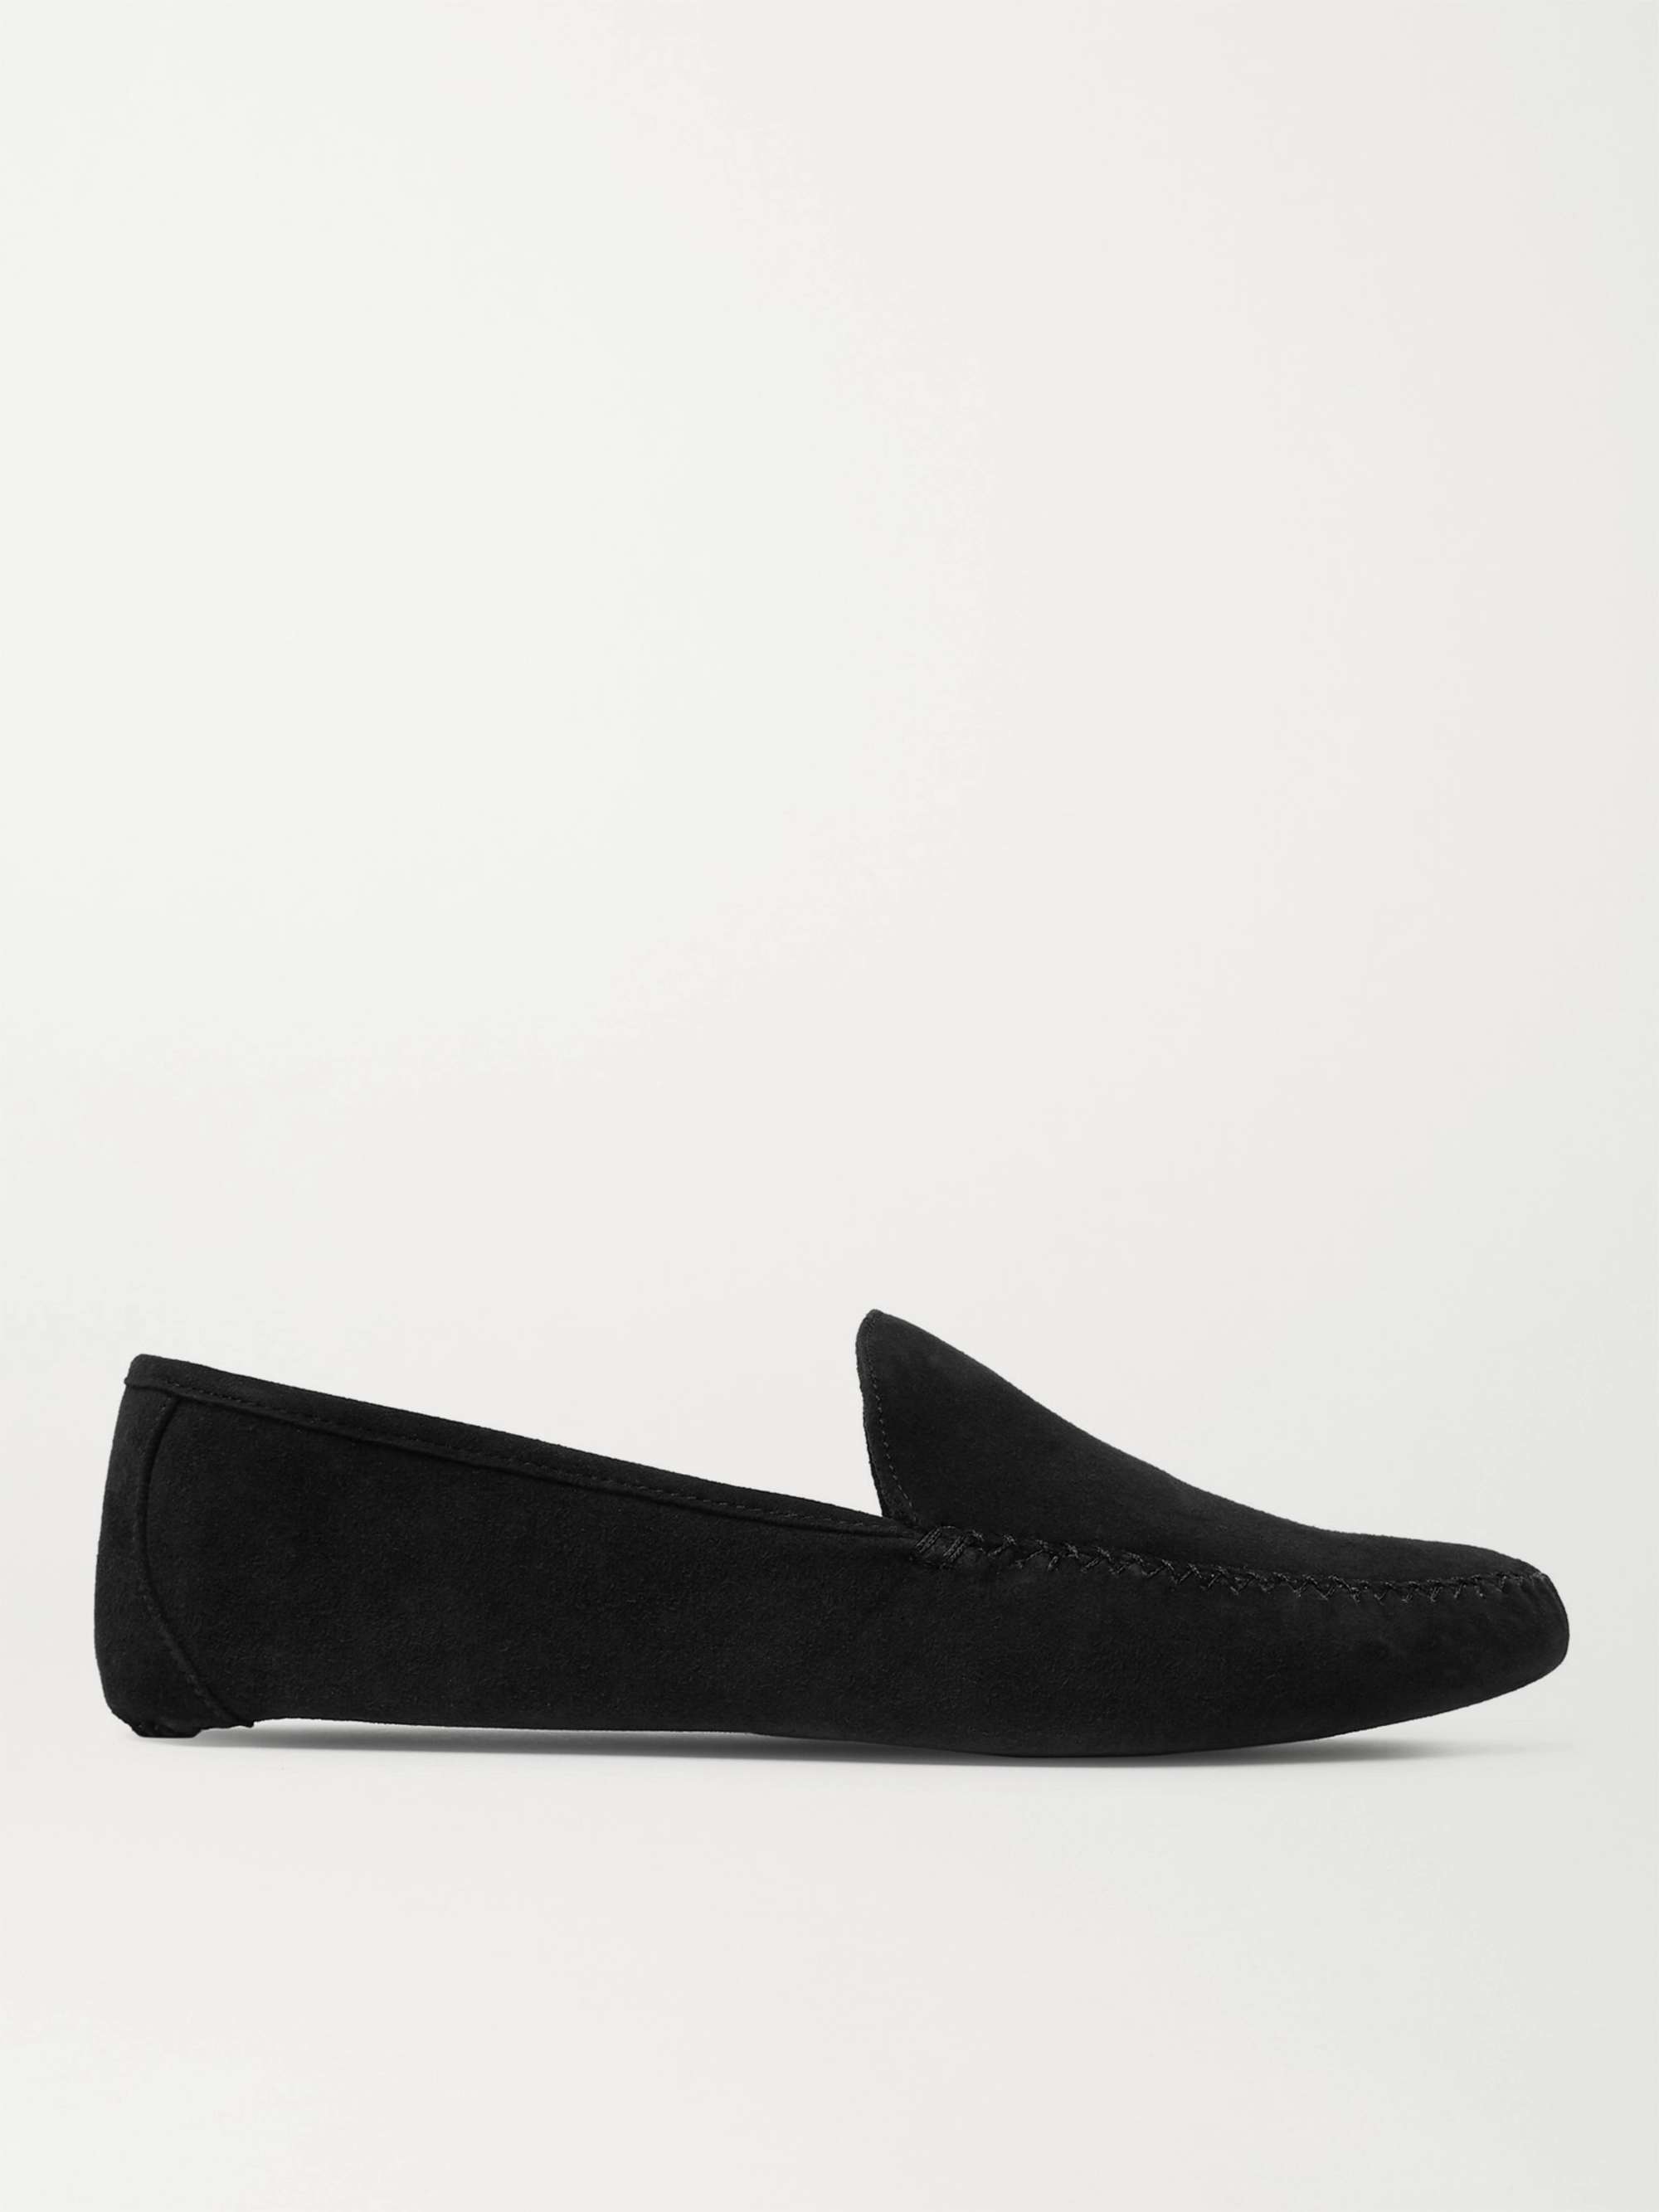 LORO PIANA Maurice Cashmere-Lined Suede Slippers | MR PORTER